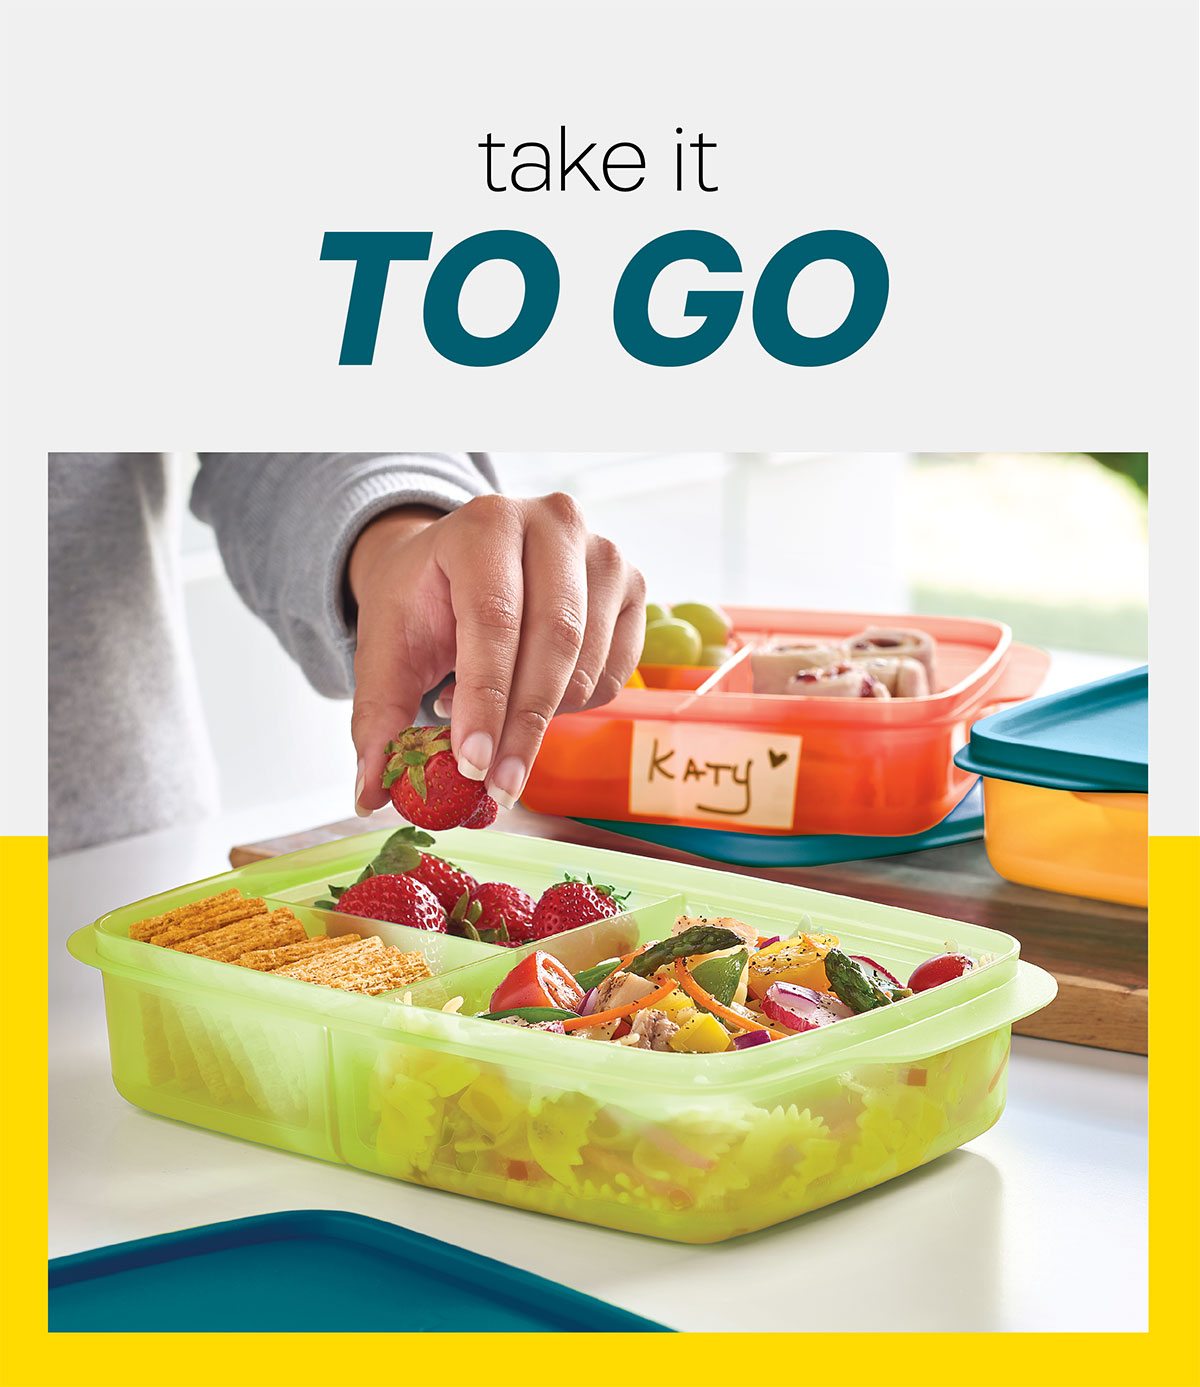 Tupperware My Lunch - A Good Companion To Carry Your Food